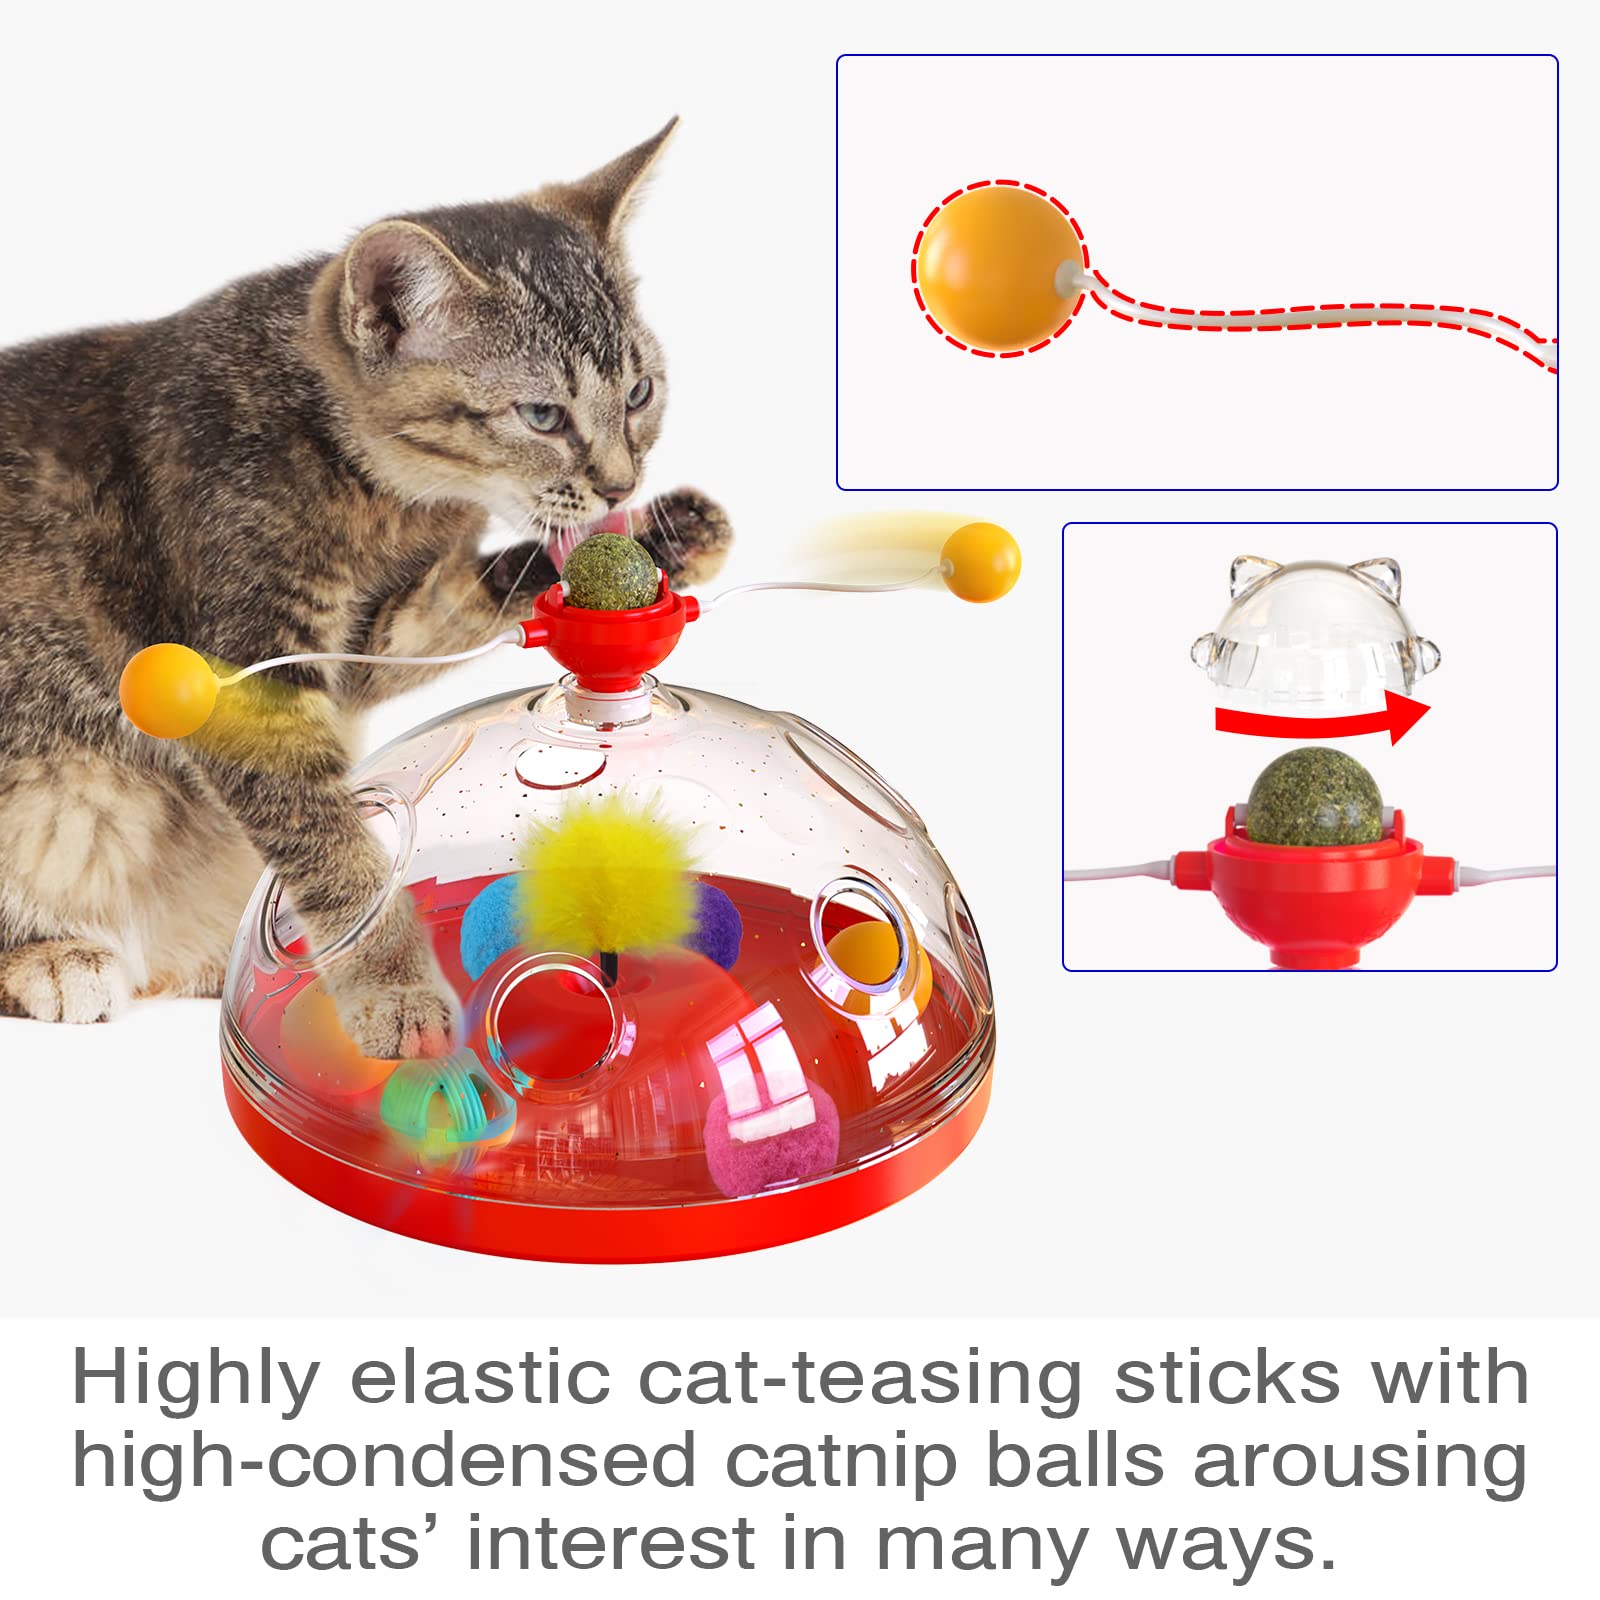 TACKDG Cat Toy Indoor for Cats Interactive Best Kitten Puzzle Toys